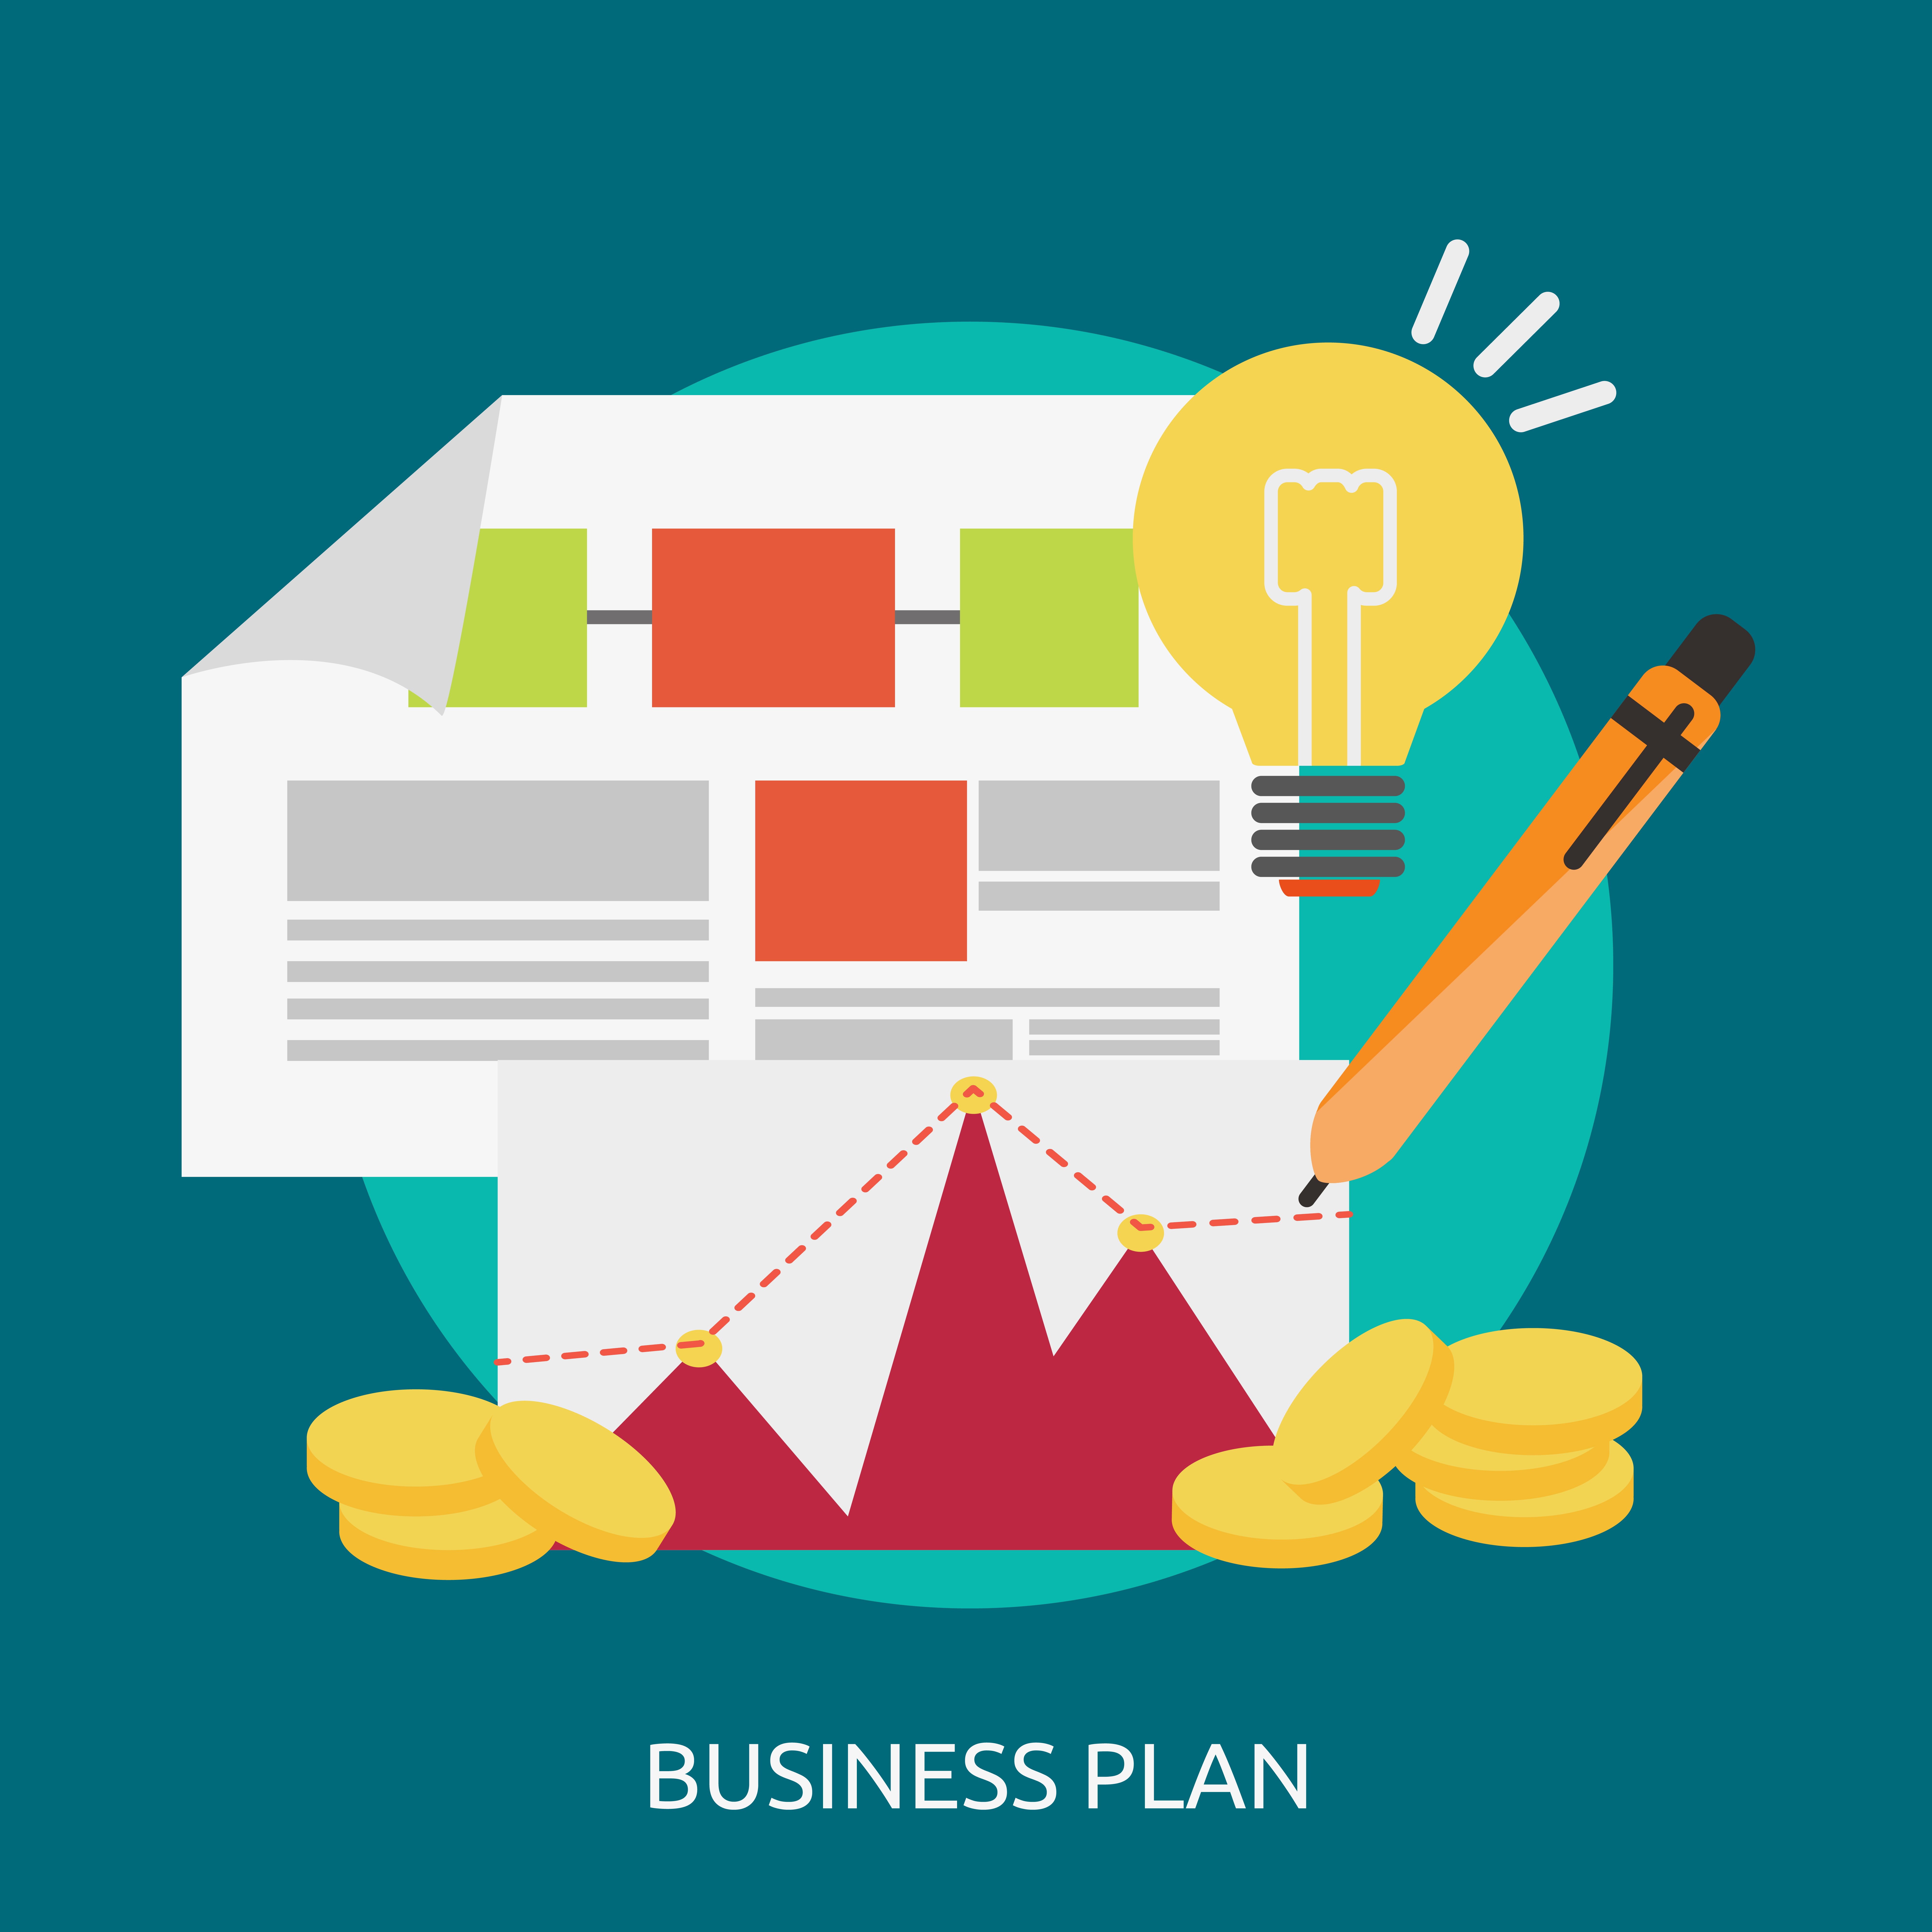 business plan art and craft